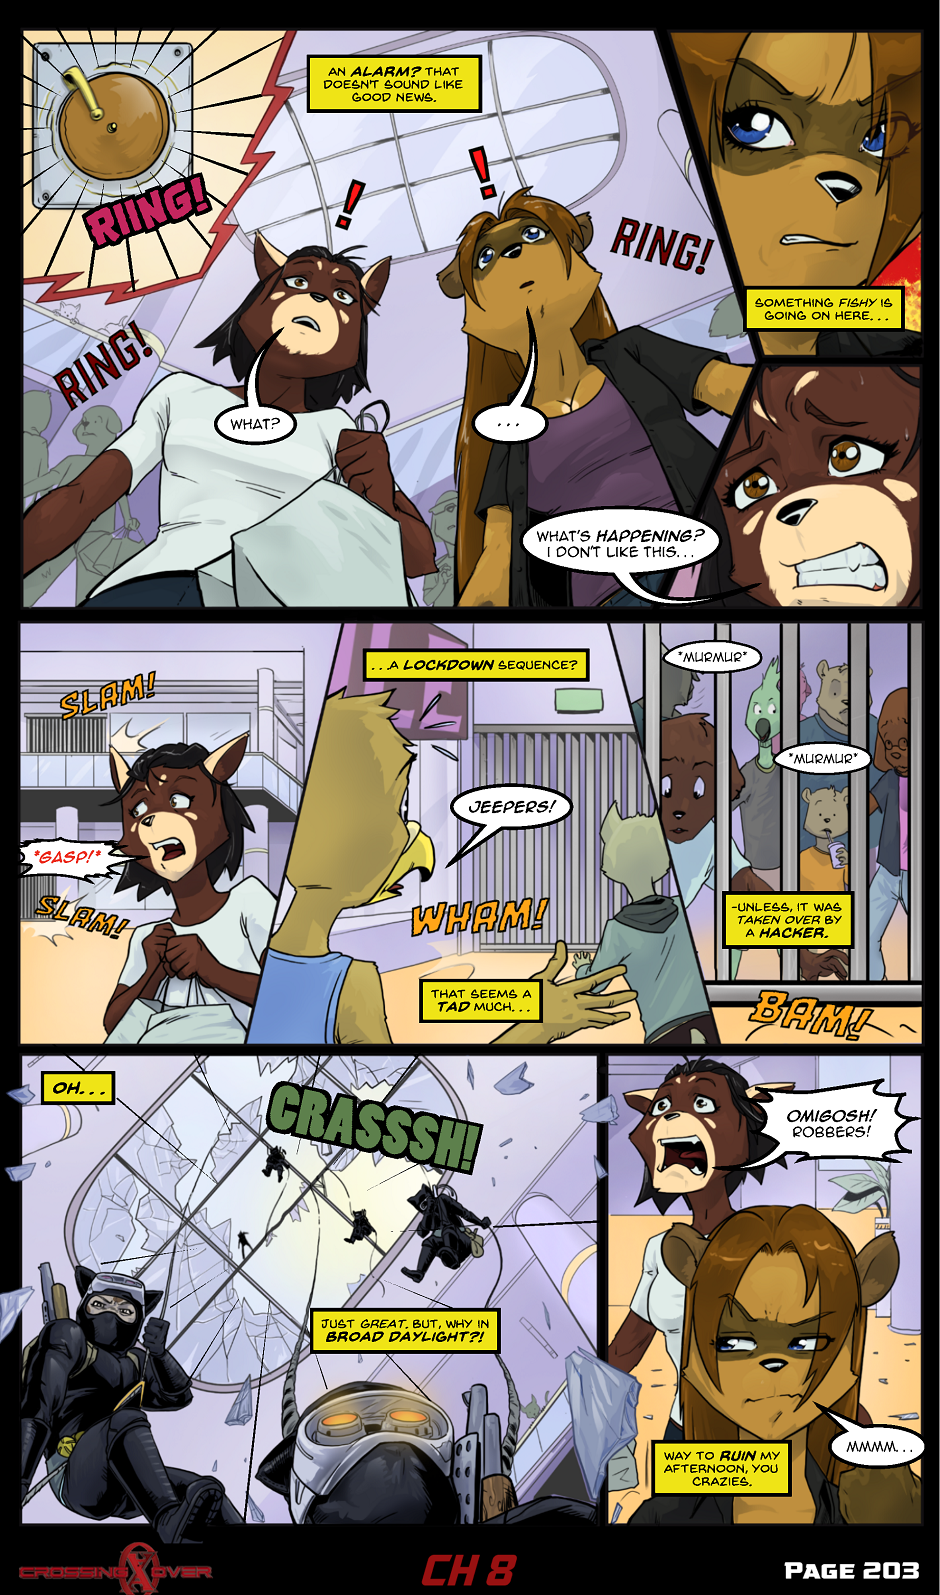 Page 203 (Ch 8)